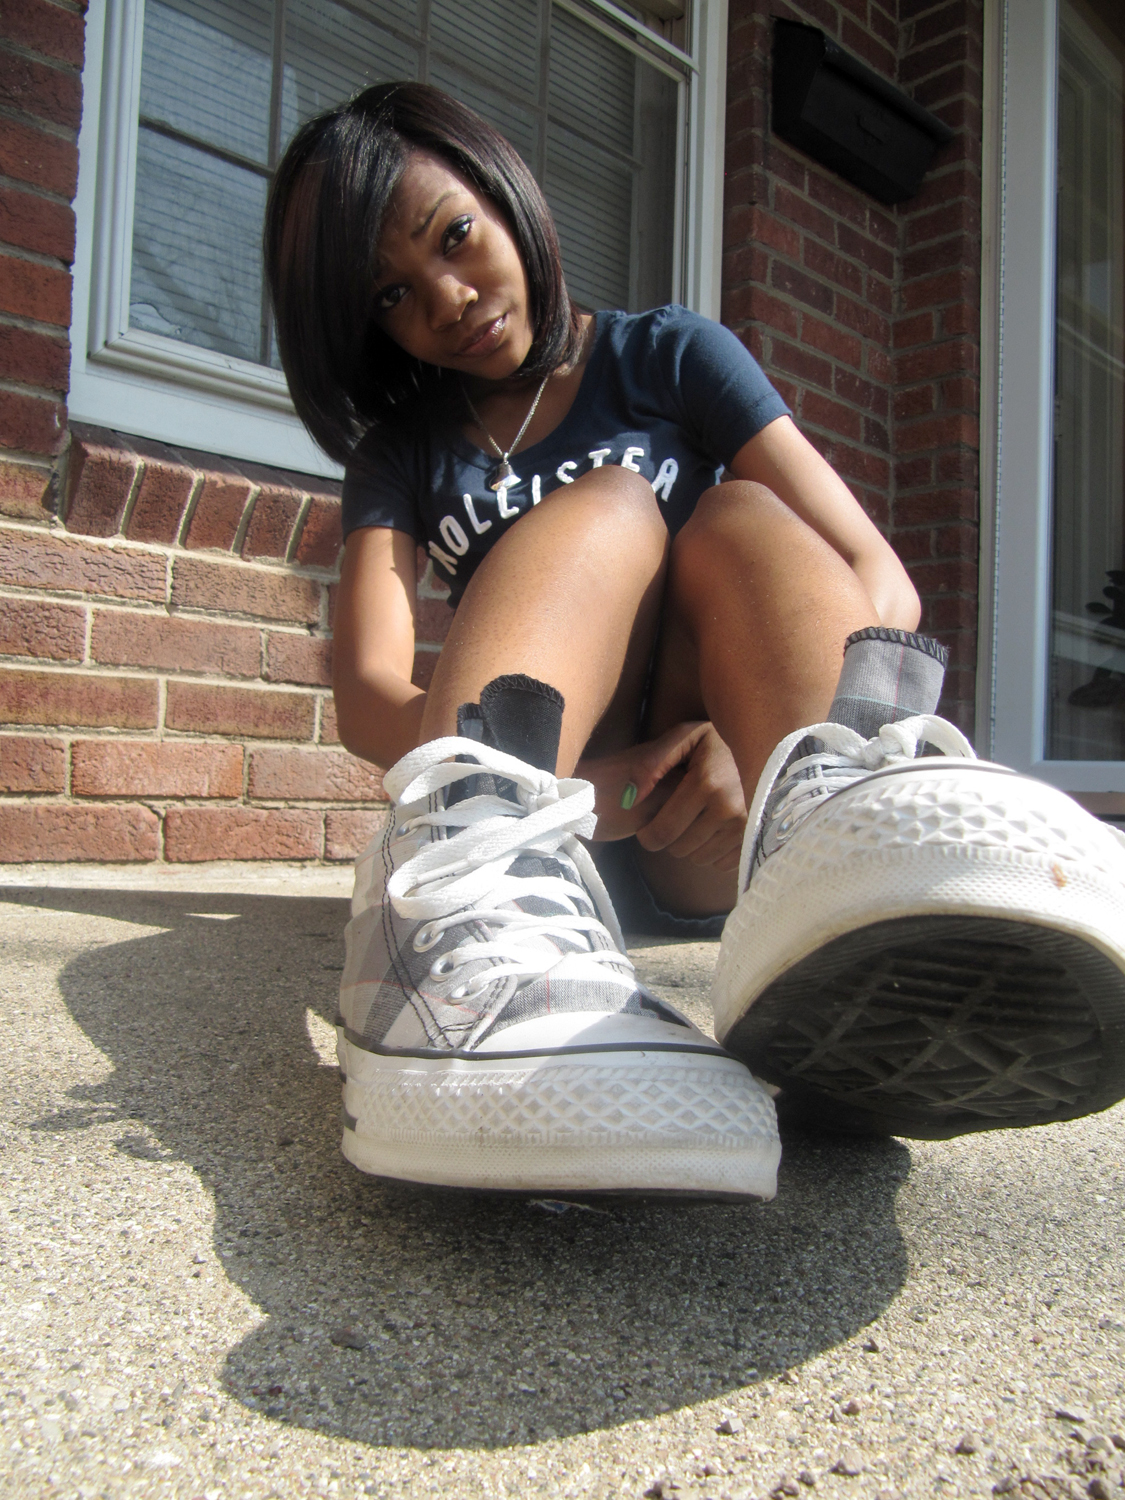 Black Girls In Sneakers Porn - Private black porn photos and video